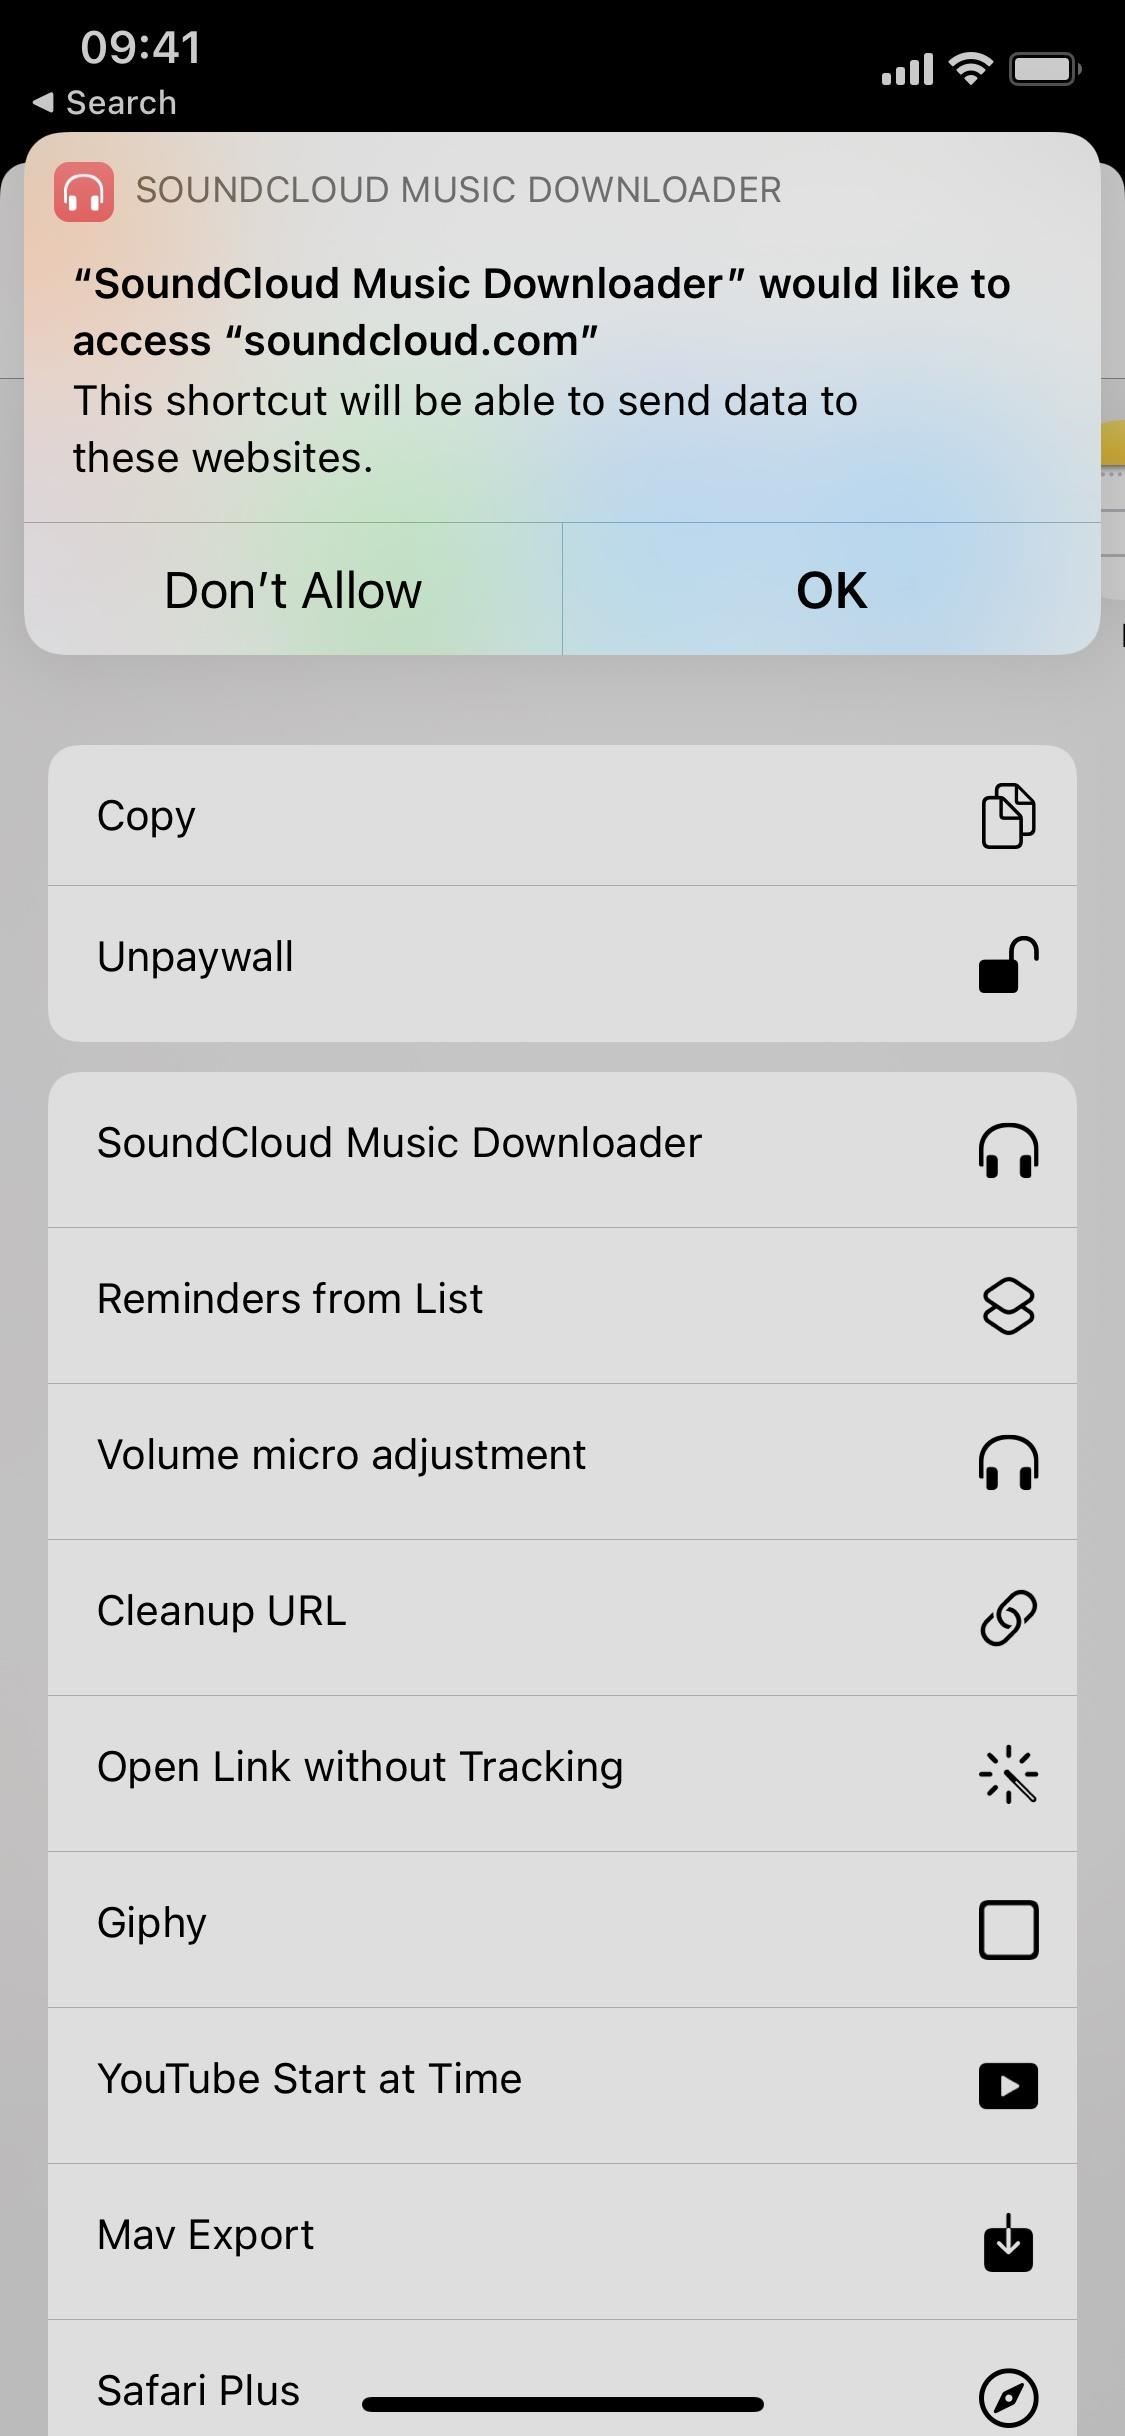 The Fastest, Easiest Way to Download SoundCloud Music Files to Your iPhone as MP3s